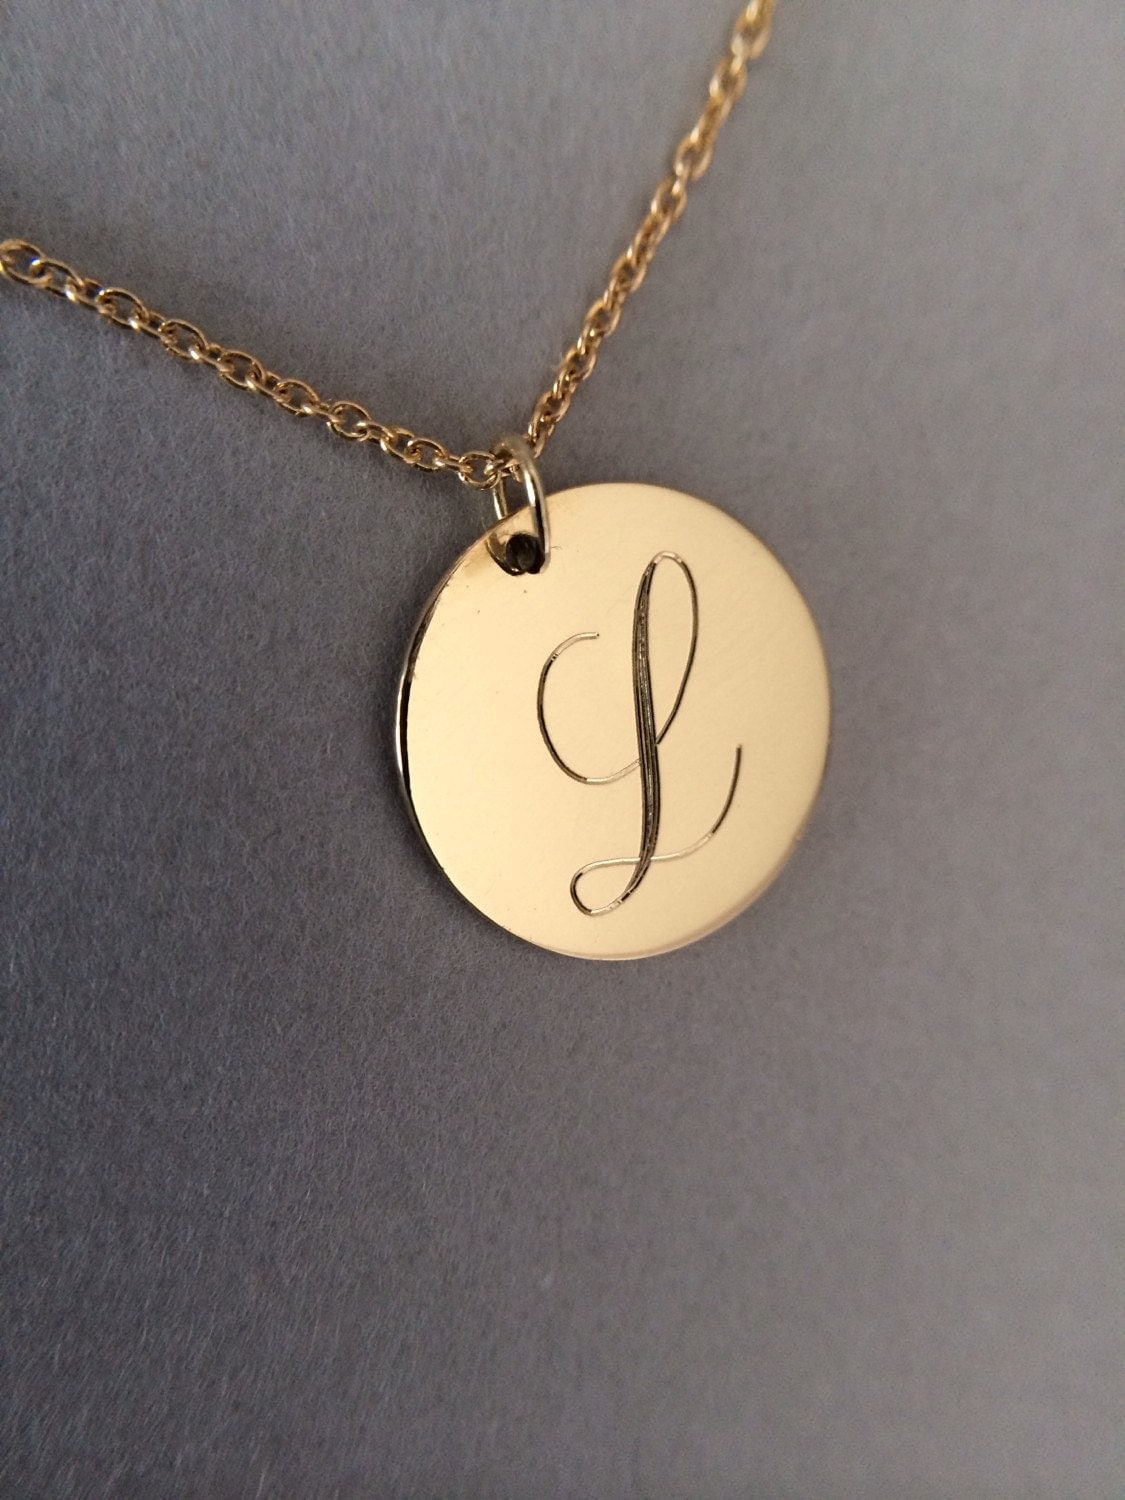 14k solid gold initial necklace name necklace by NOSTALGII on Etsy